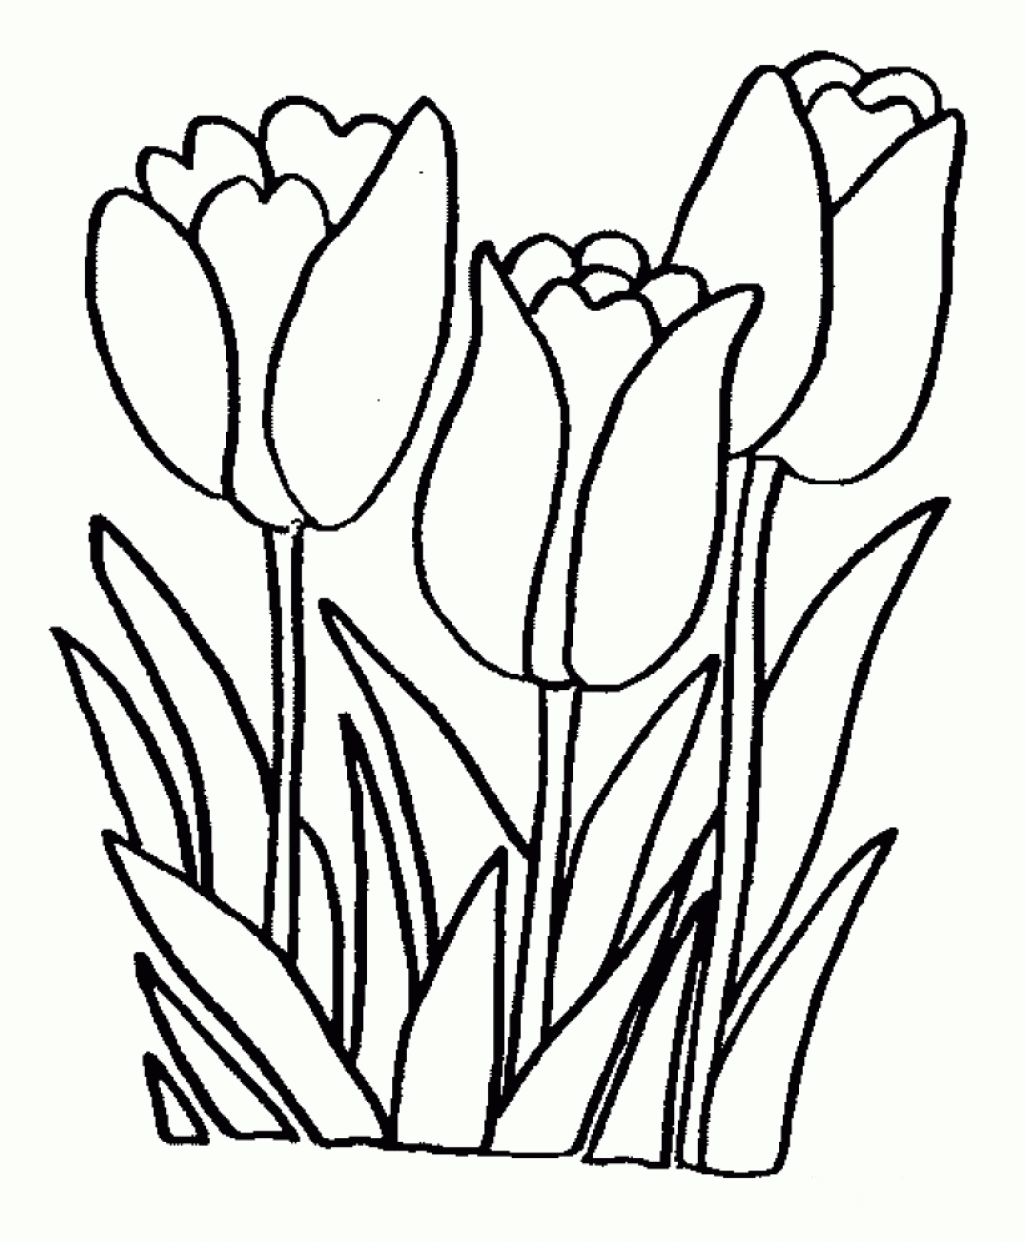 Flower Garden Coloring Pages Flowers Coloring Sheets Free Coloring ...